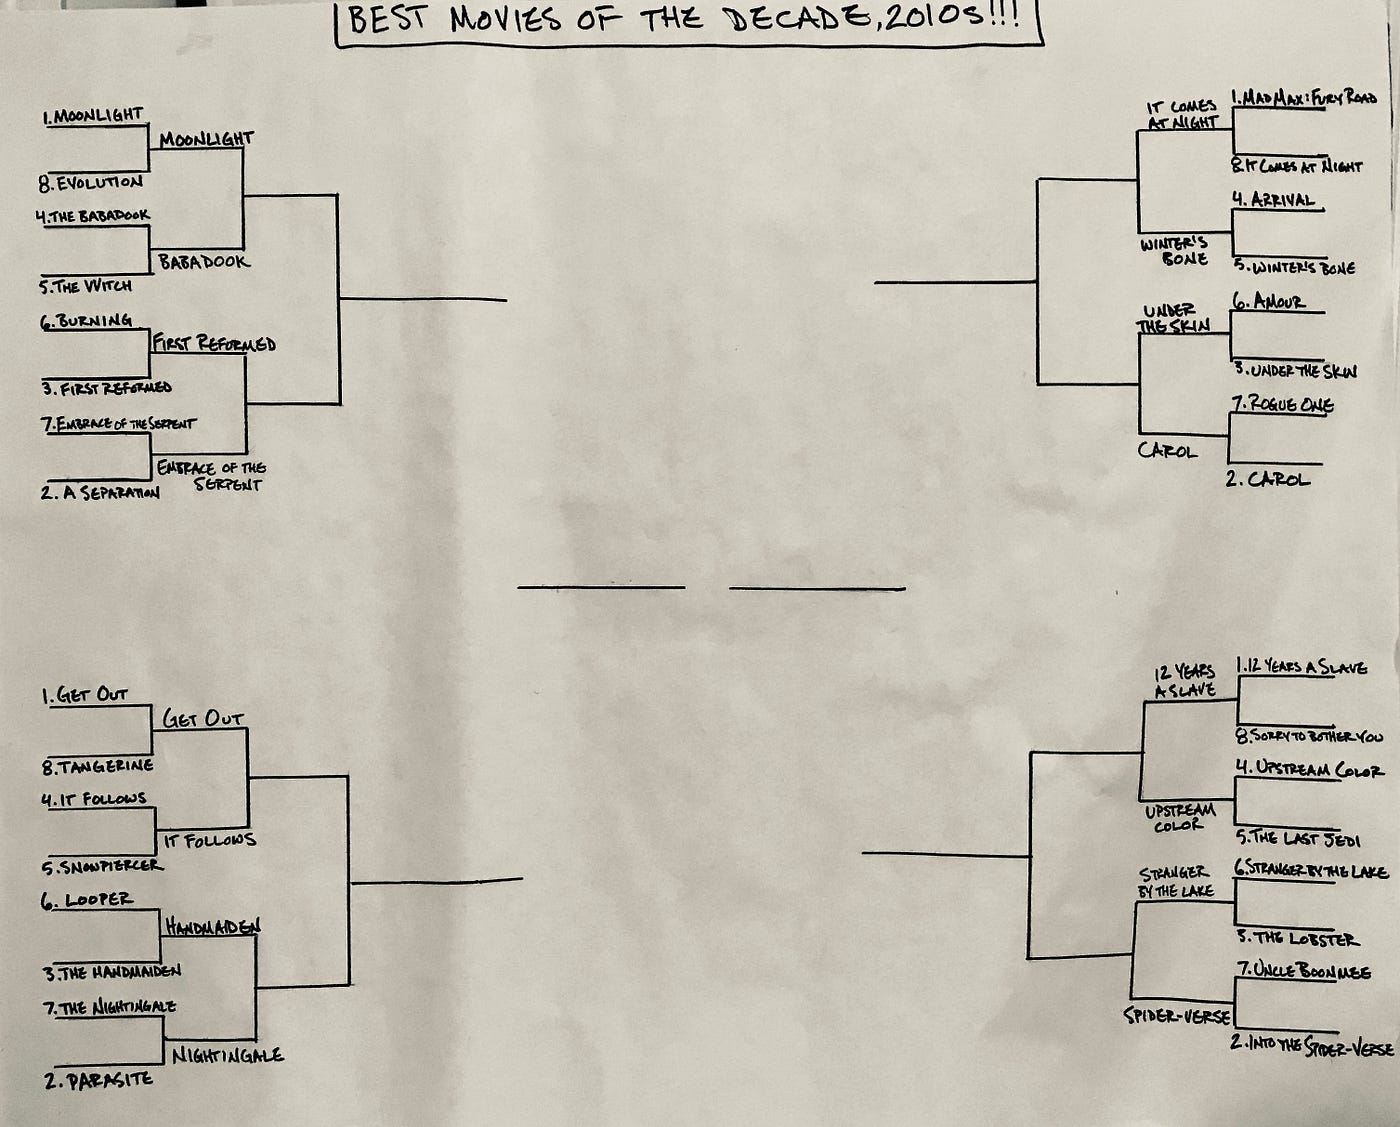 TODAY's Rom-Com Bracket Showdown: Which movie was crowned champion?